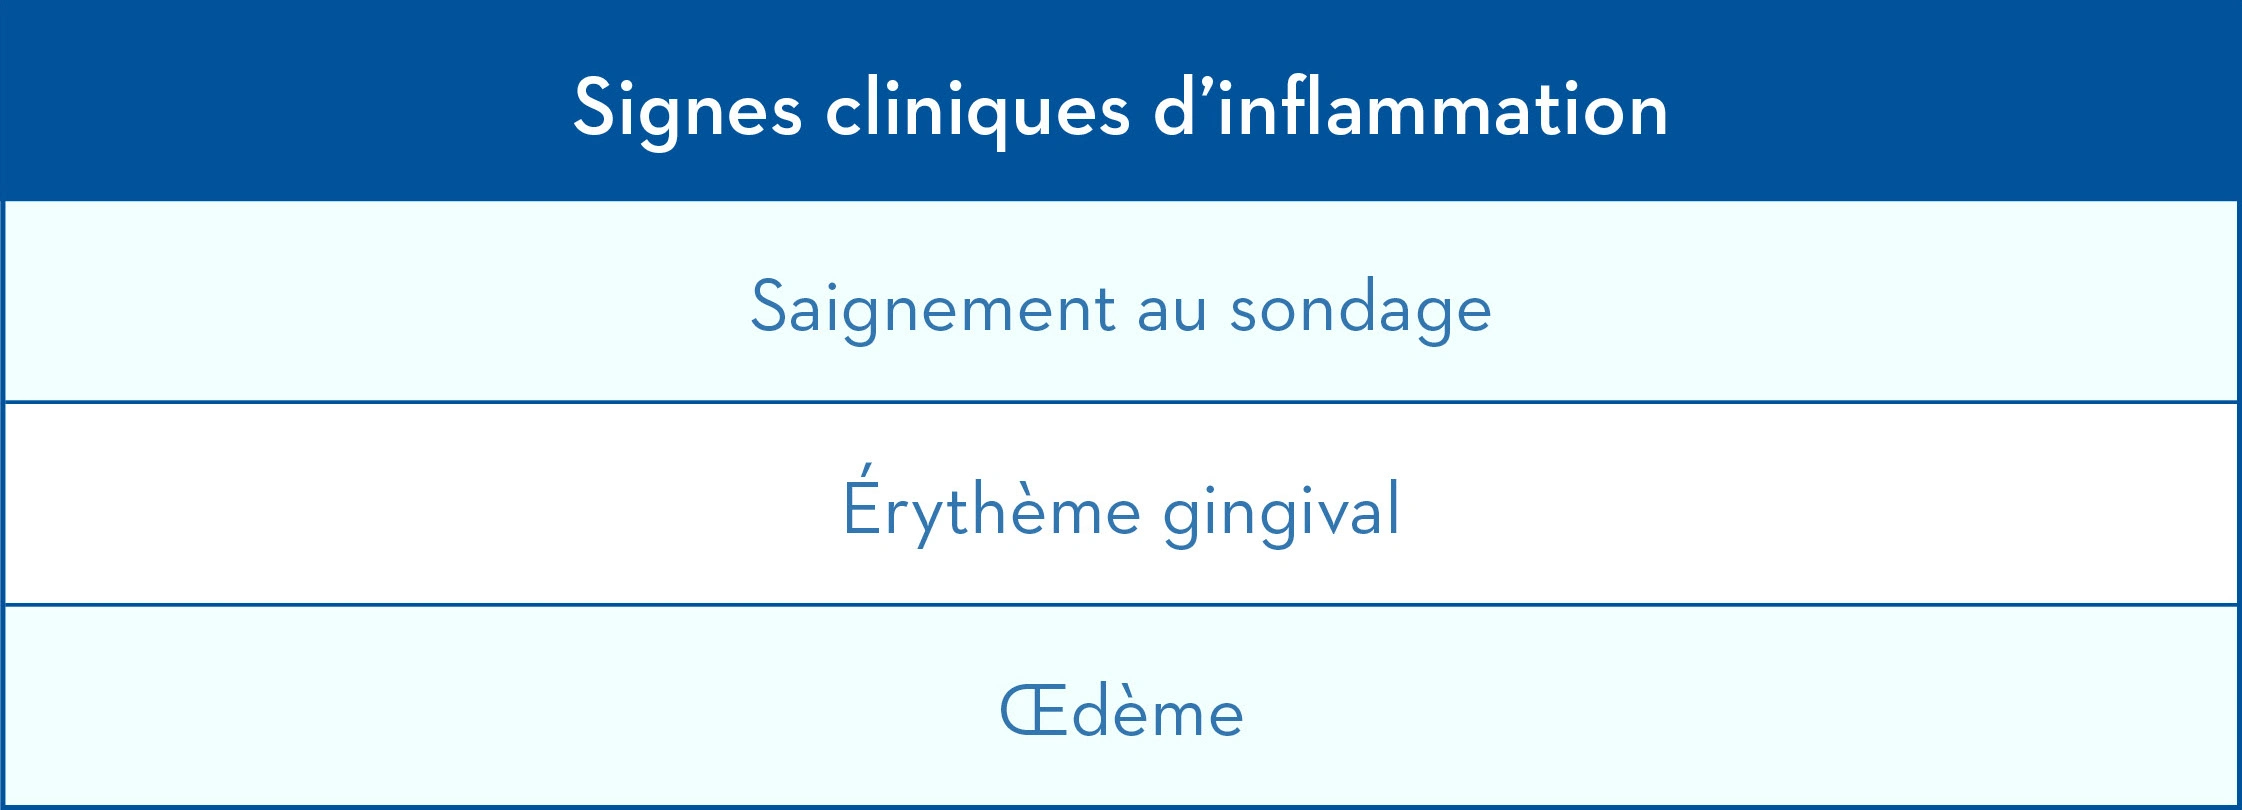 Clinical Signs of Inflammation Bleeding on probing Gingival Erythema Edema